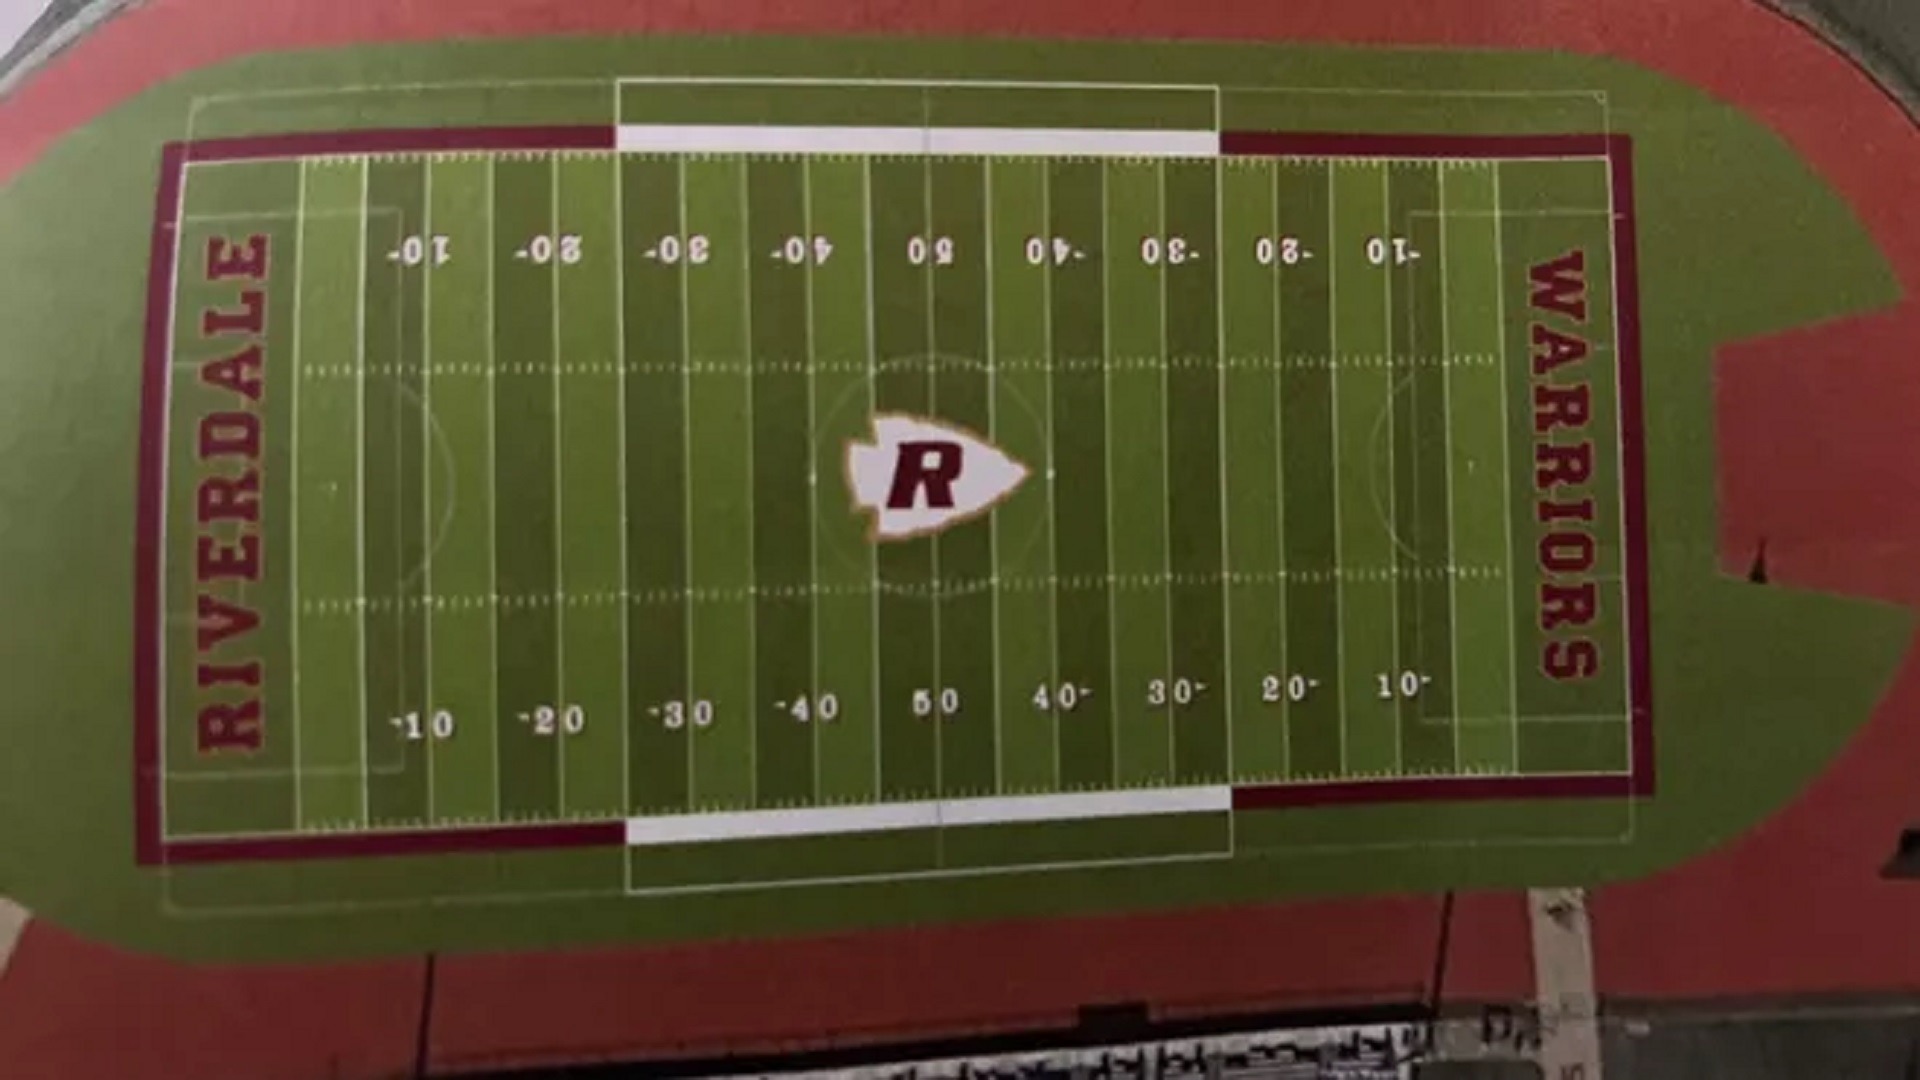 RiverdaleSlide 9 - Riverdale football the latest area program to get artificial turf